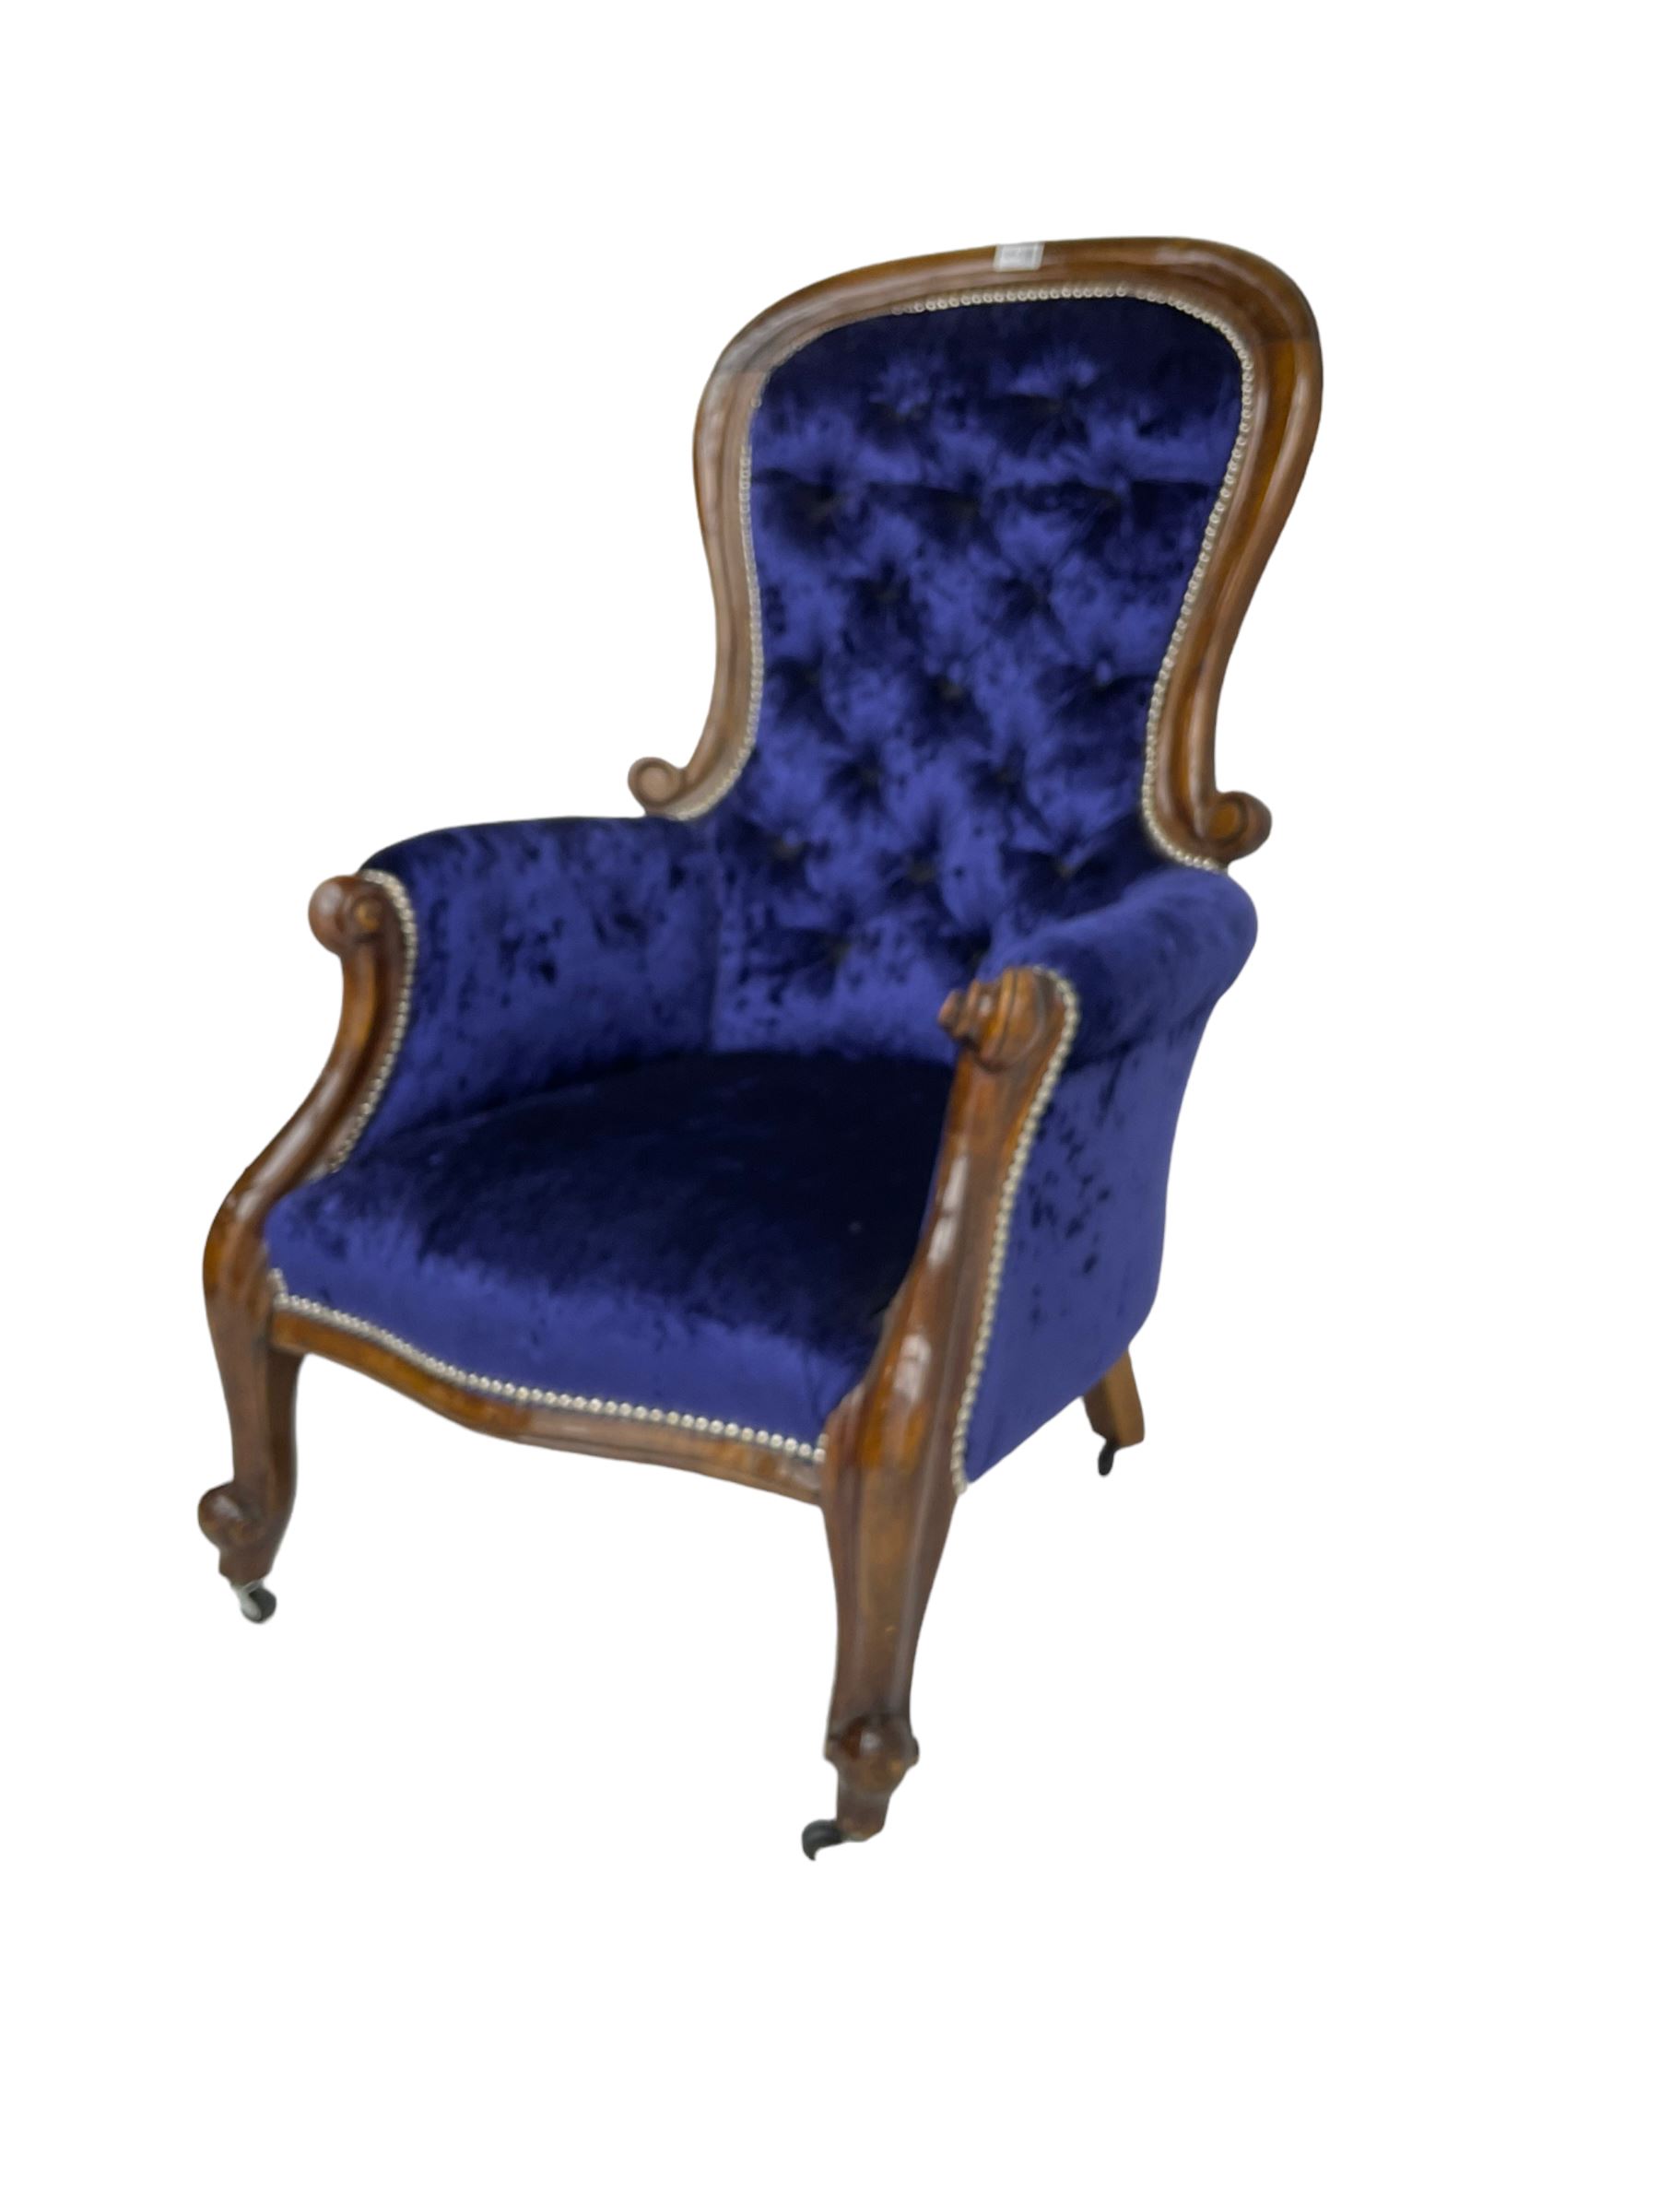 Victorian armchair - Image 3 of 6